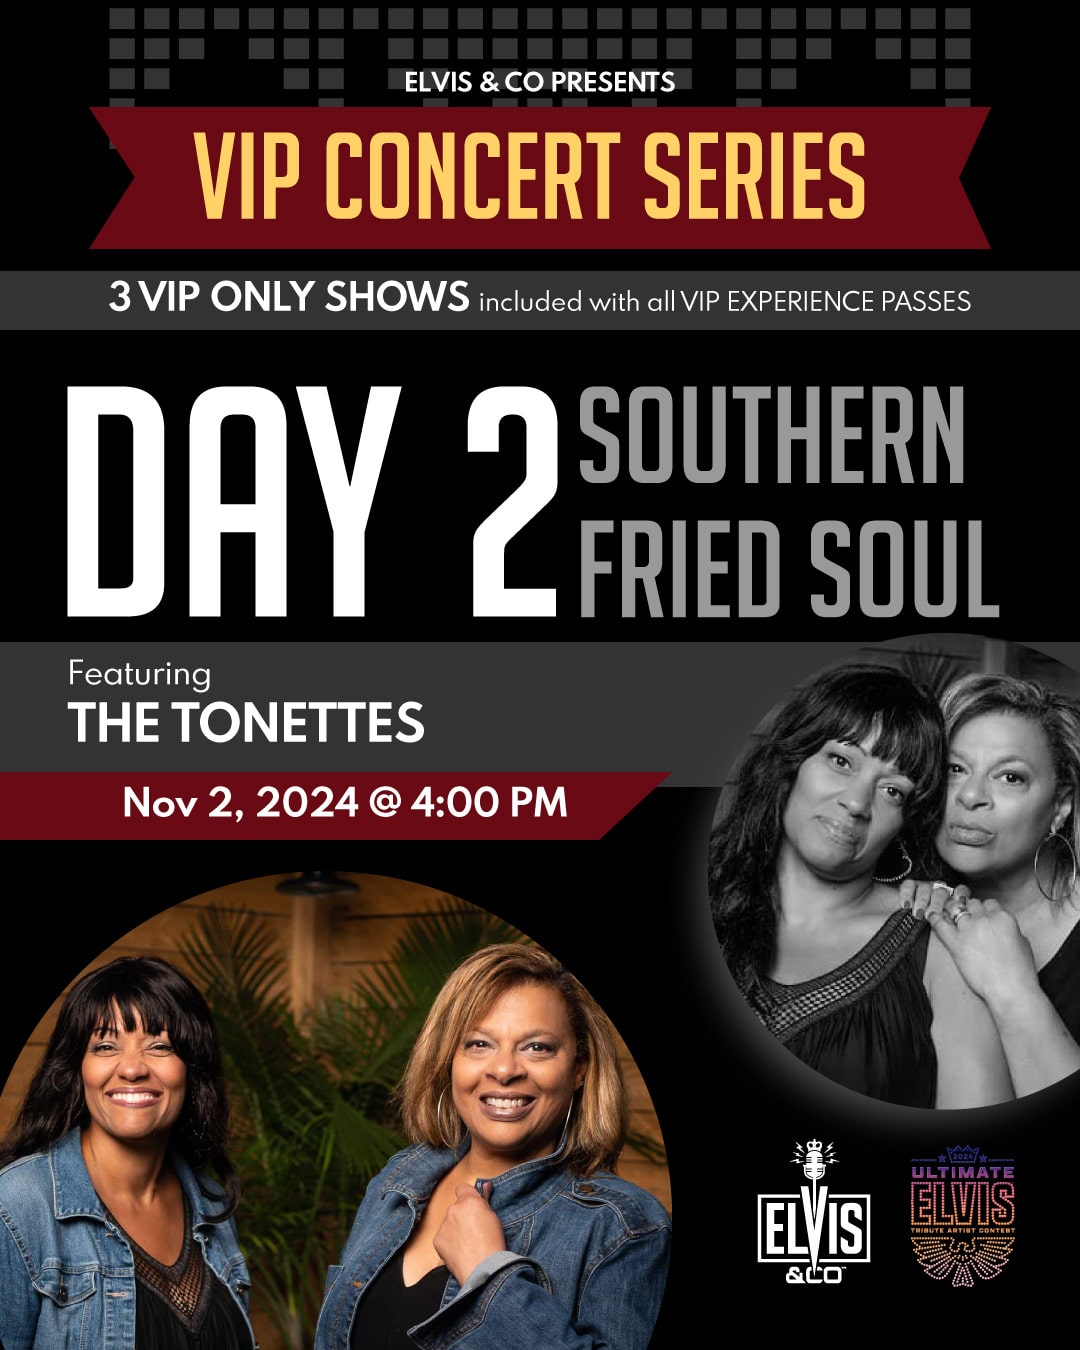 Elvis & Co VIP Concert Southern Fried Soul with The Tonettes